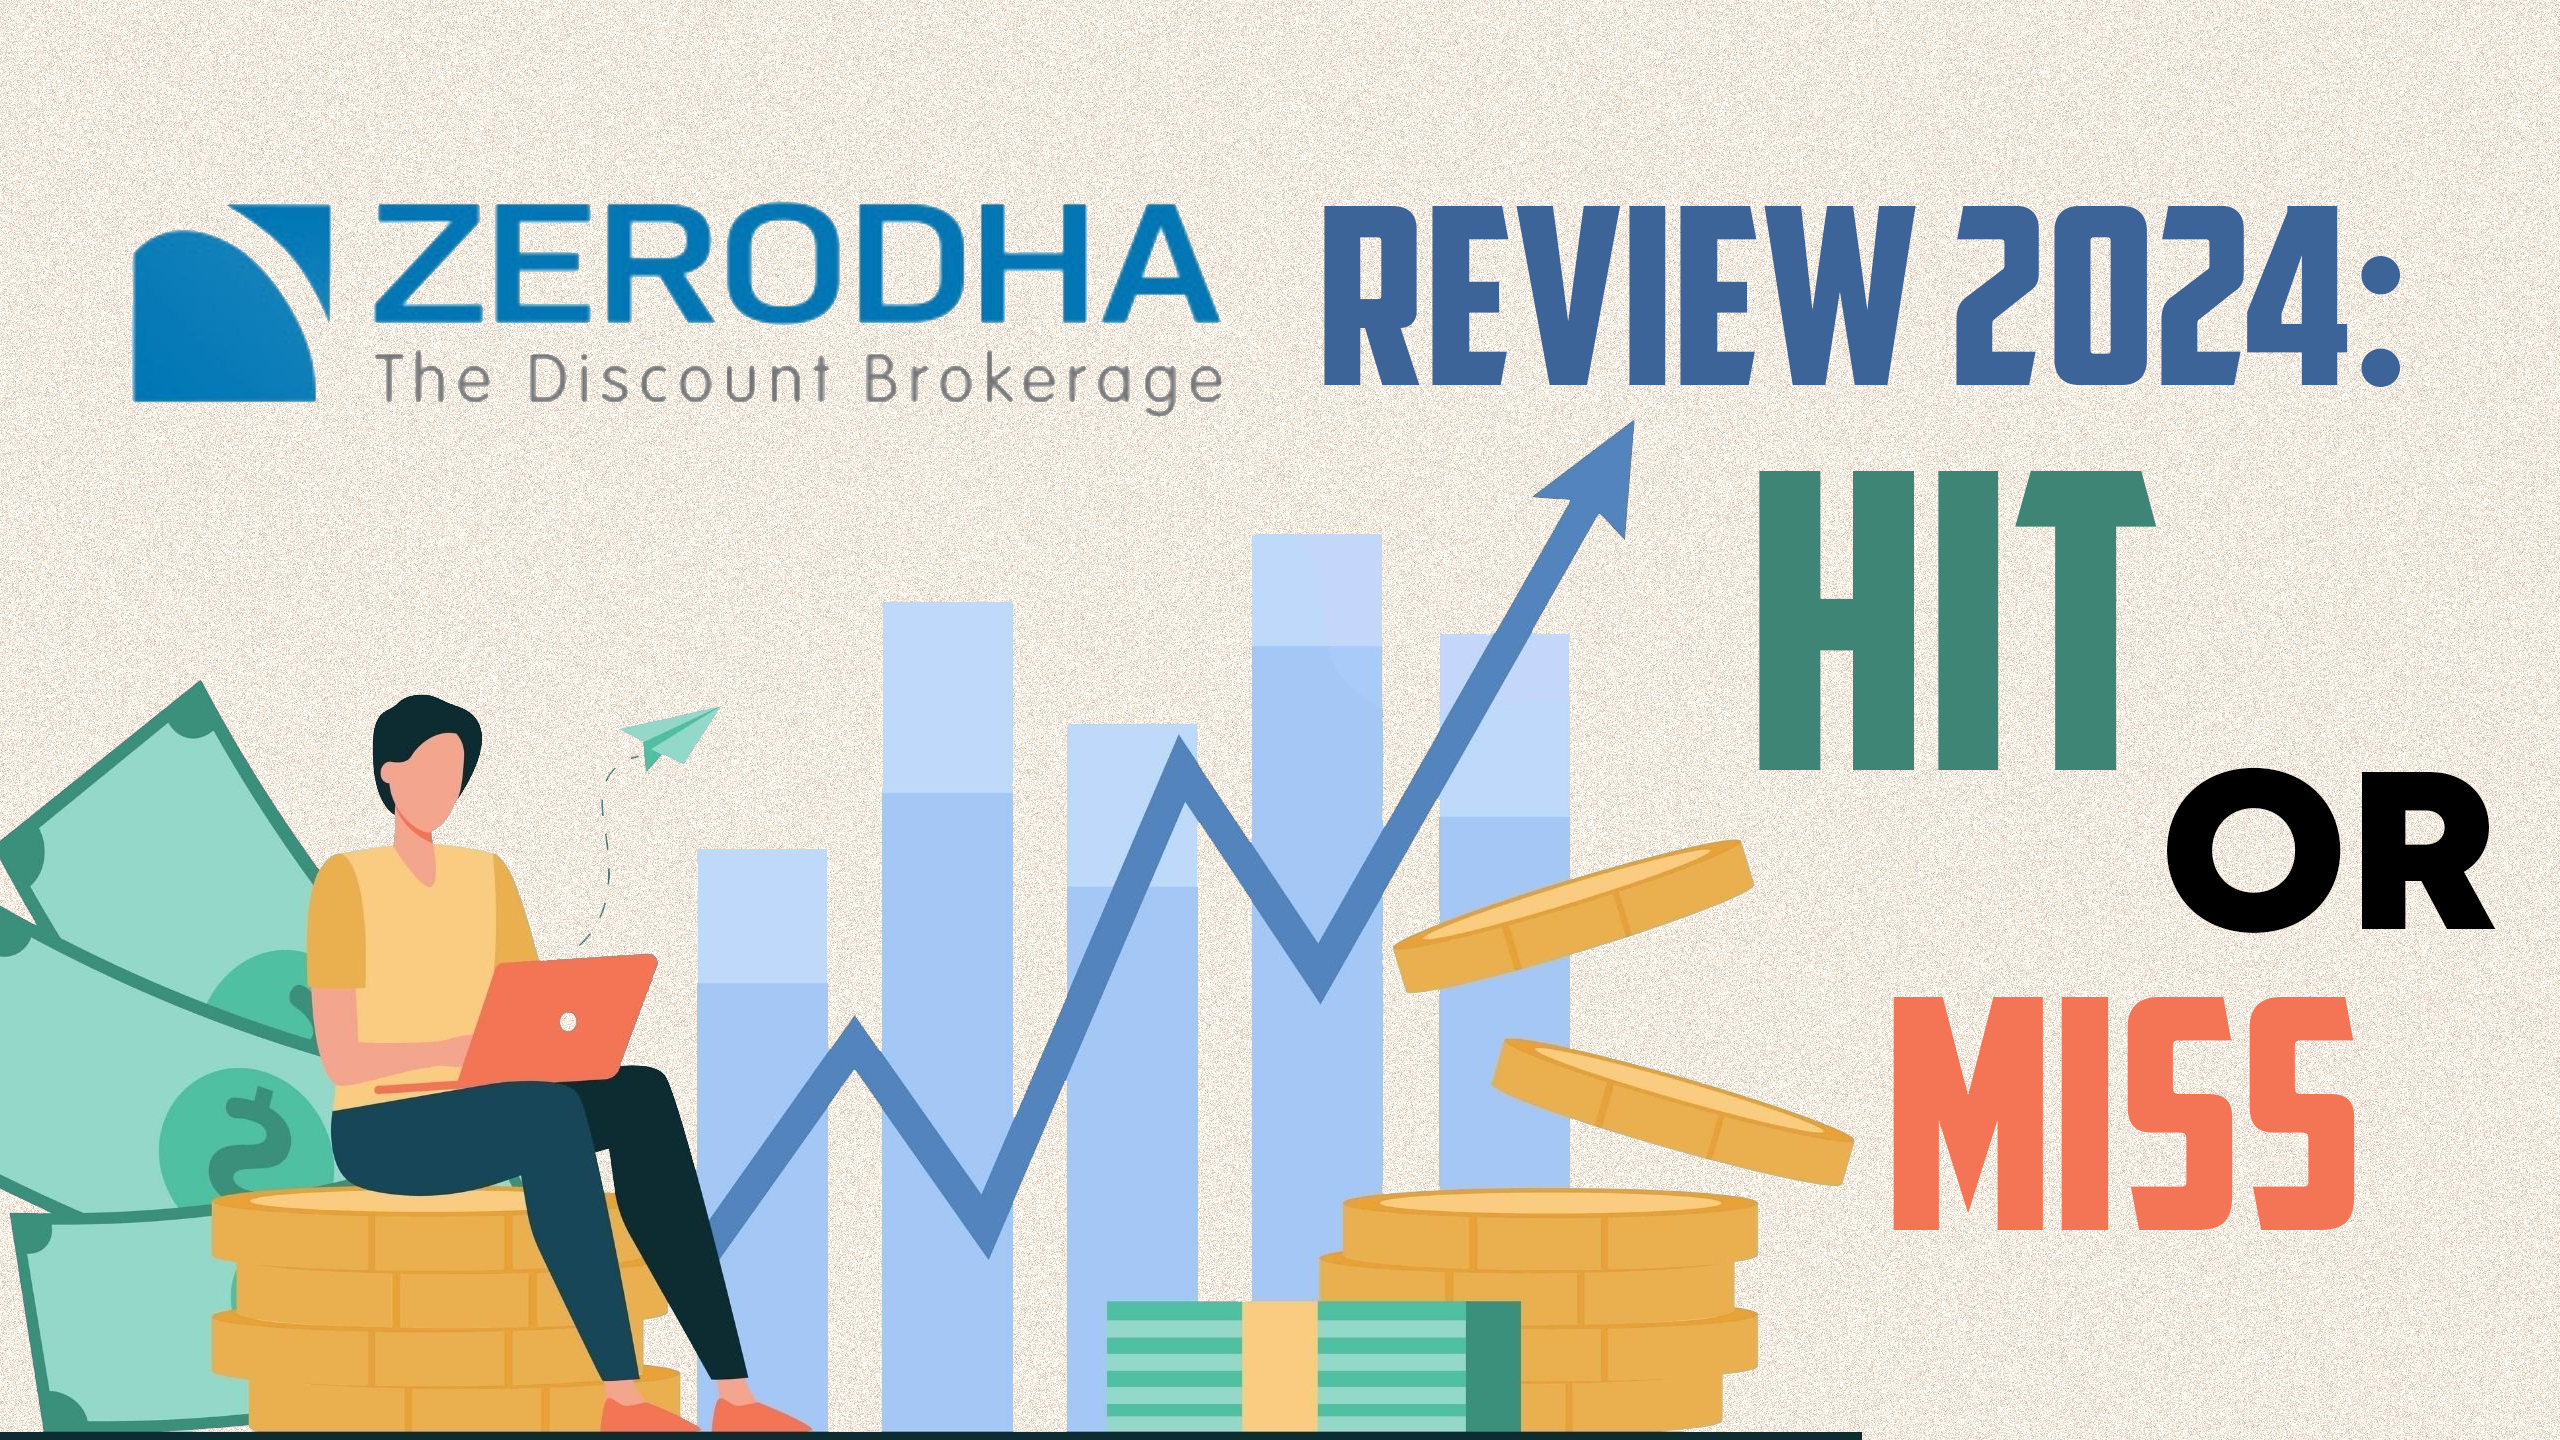 Ultimate Zerodha Review 2024: Hit or Miss